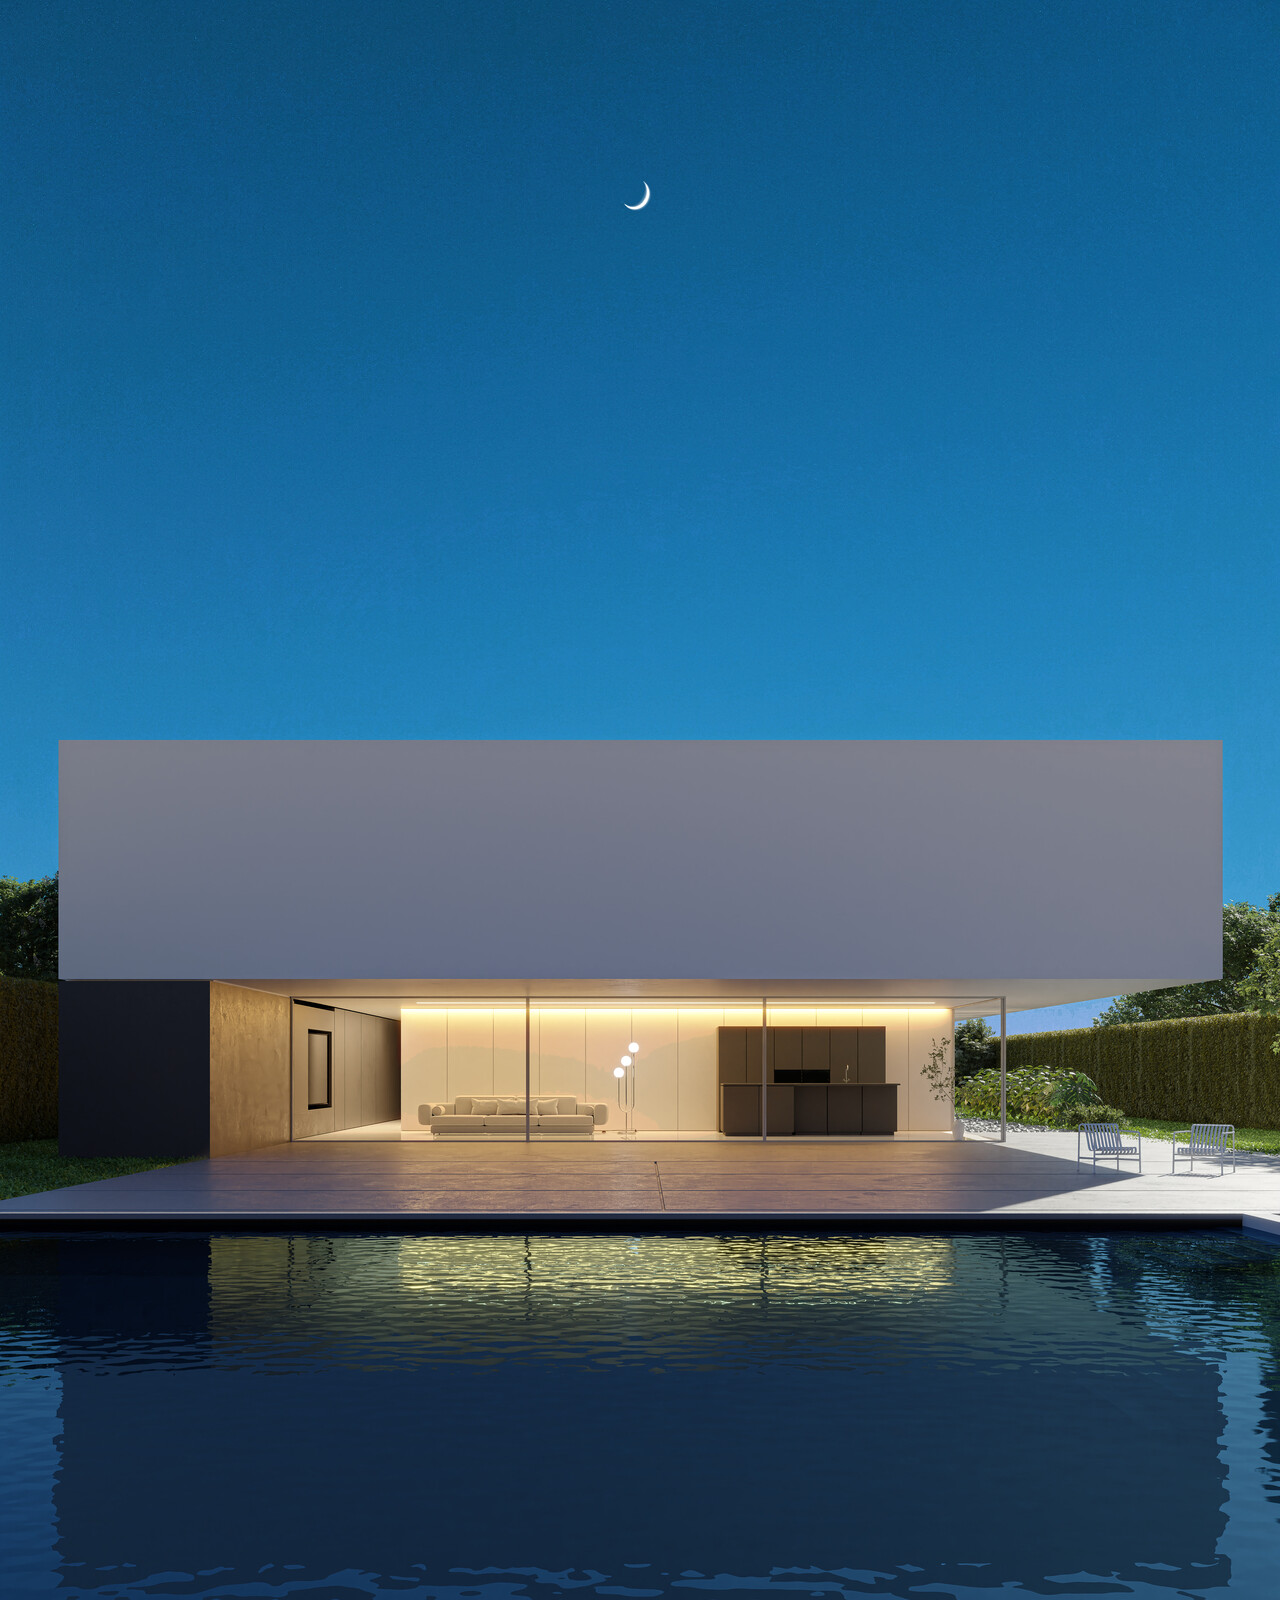 CASA DEL SILENCIO, VALENCIA by FRAN SILVESTRE Architects Modeling and Rendering in Blender